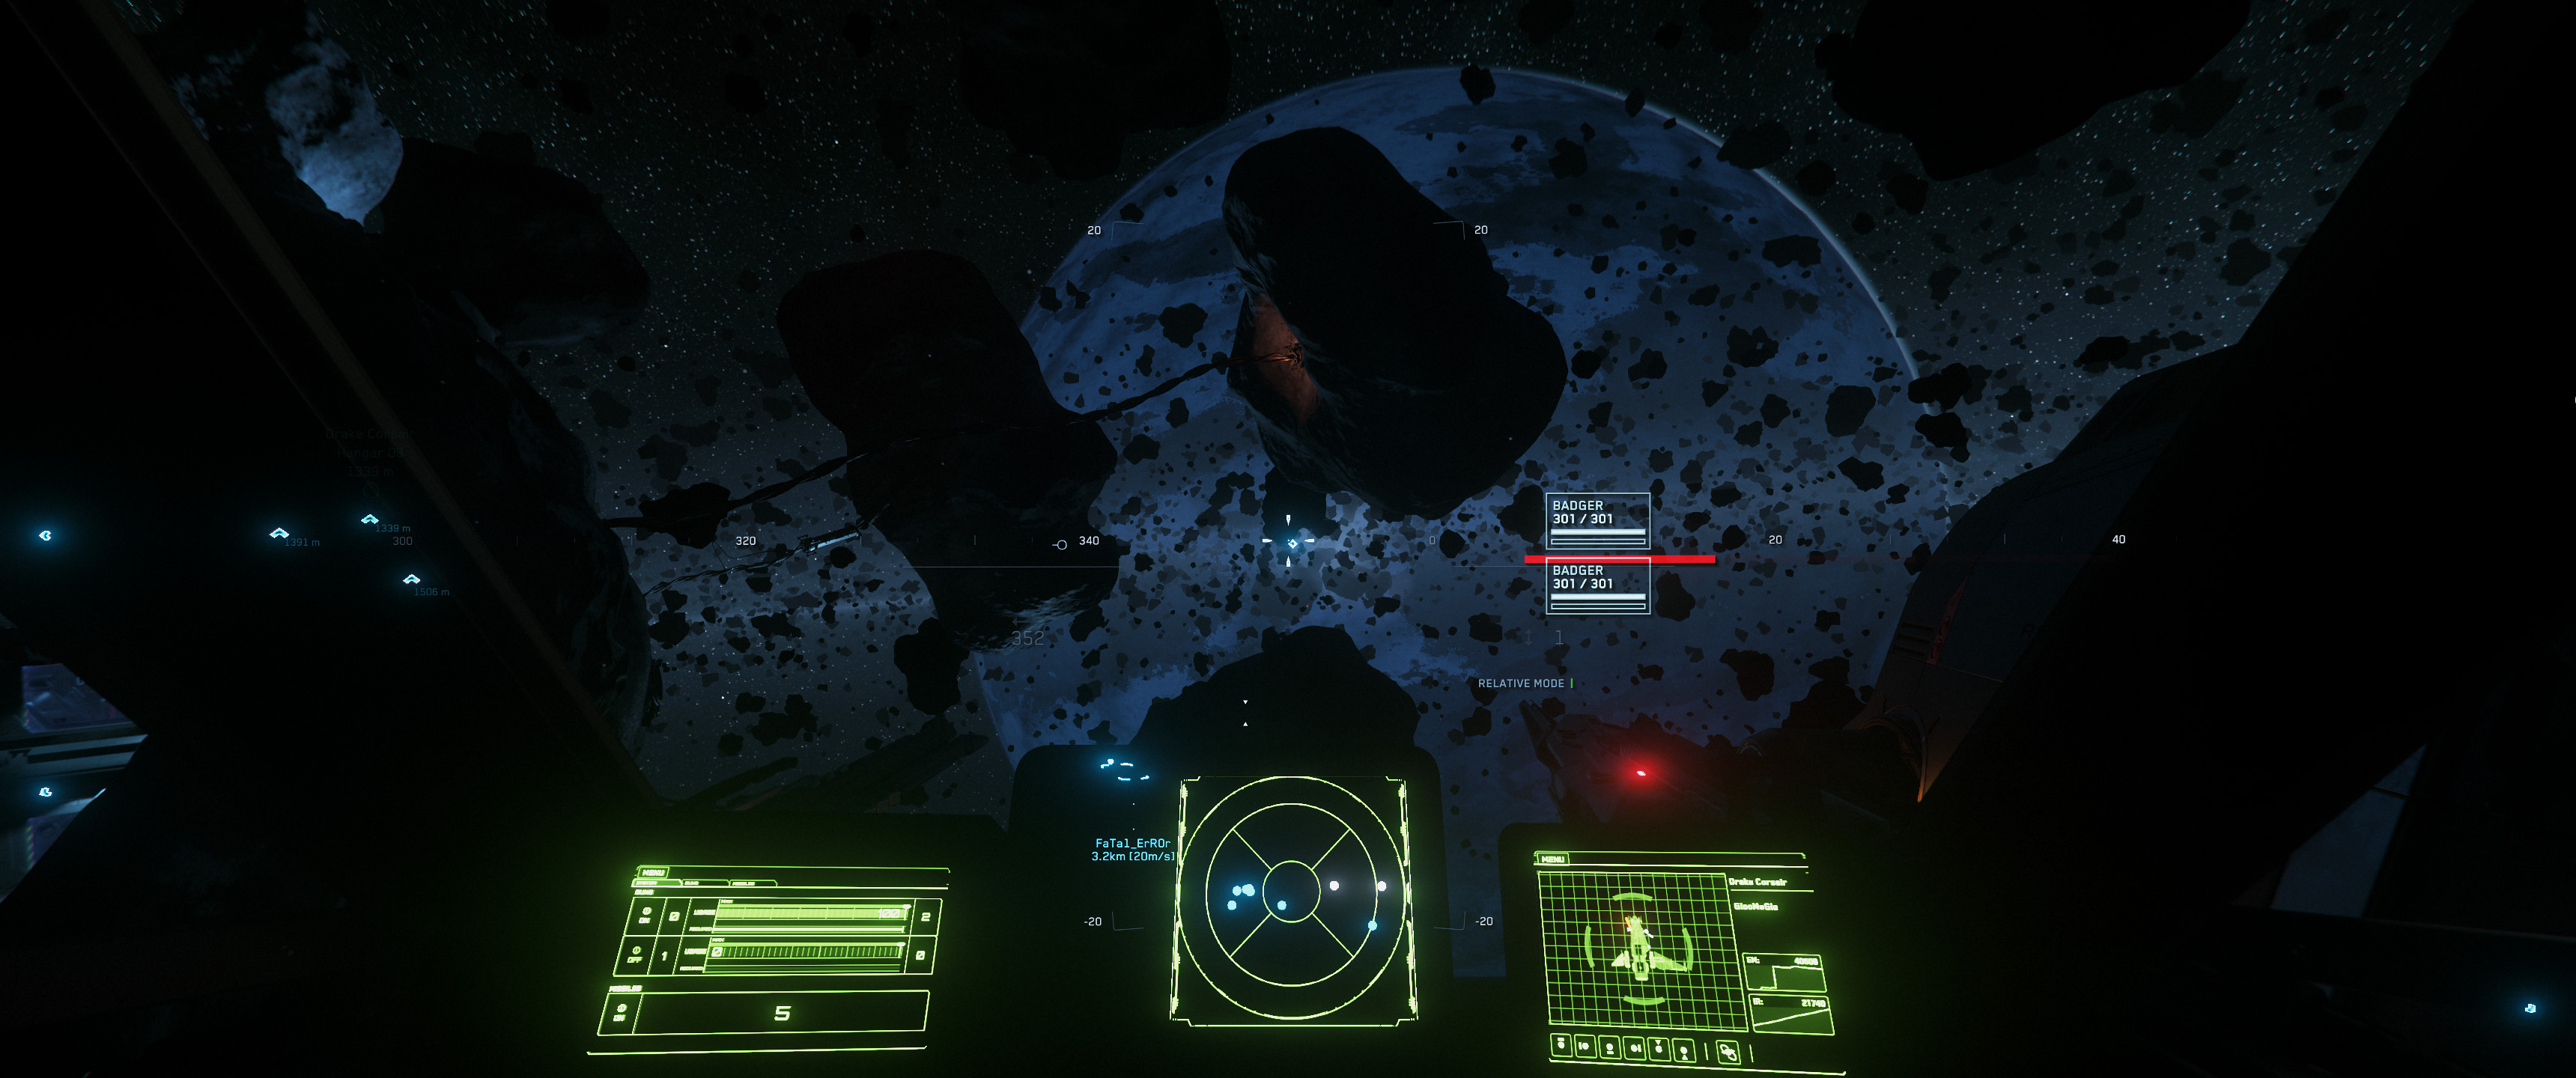 First-person view from a ship’s turret gun, a dark foreground lit by targeting and status displays looking out at a hazy, beautifully-detailed asteroid field in front of the dark side of a barely-lit planet